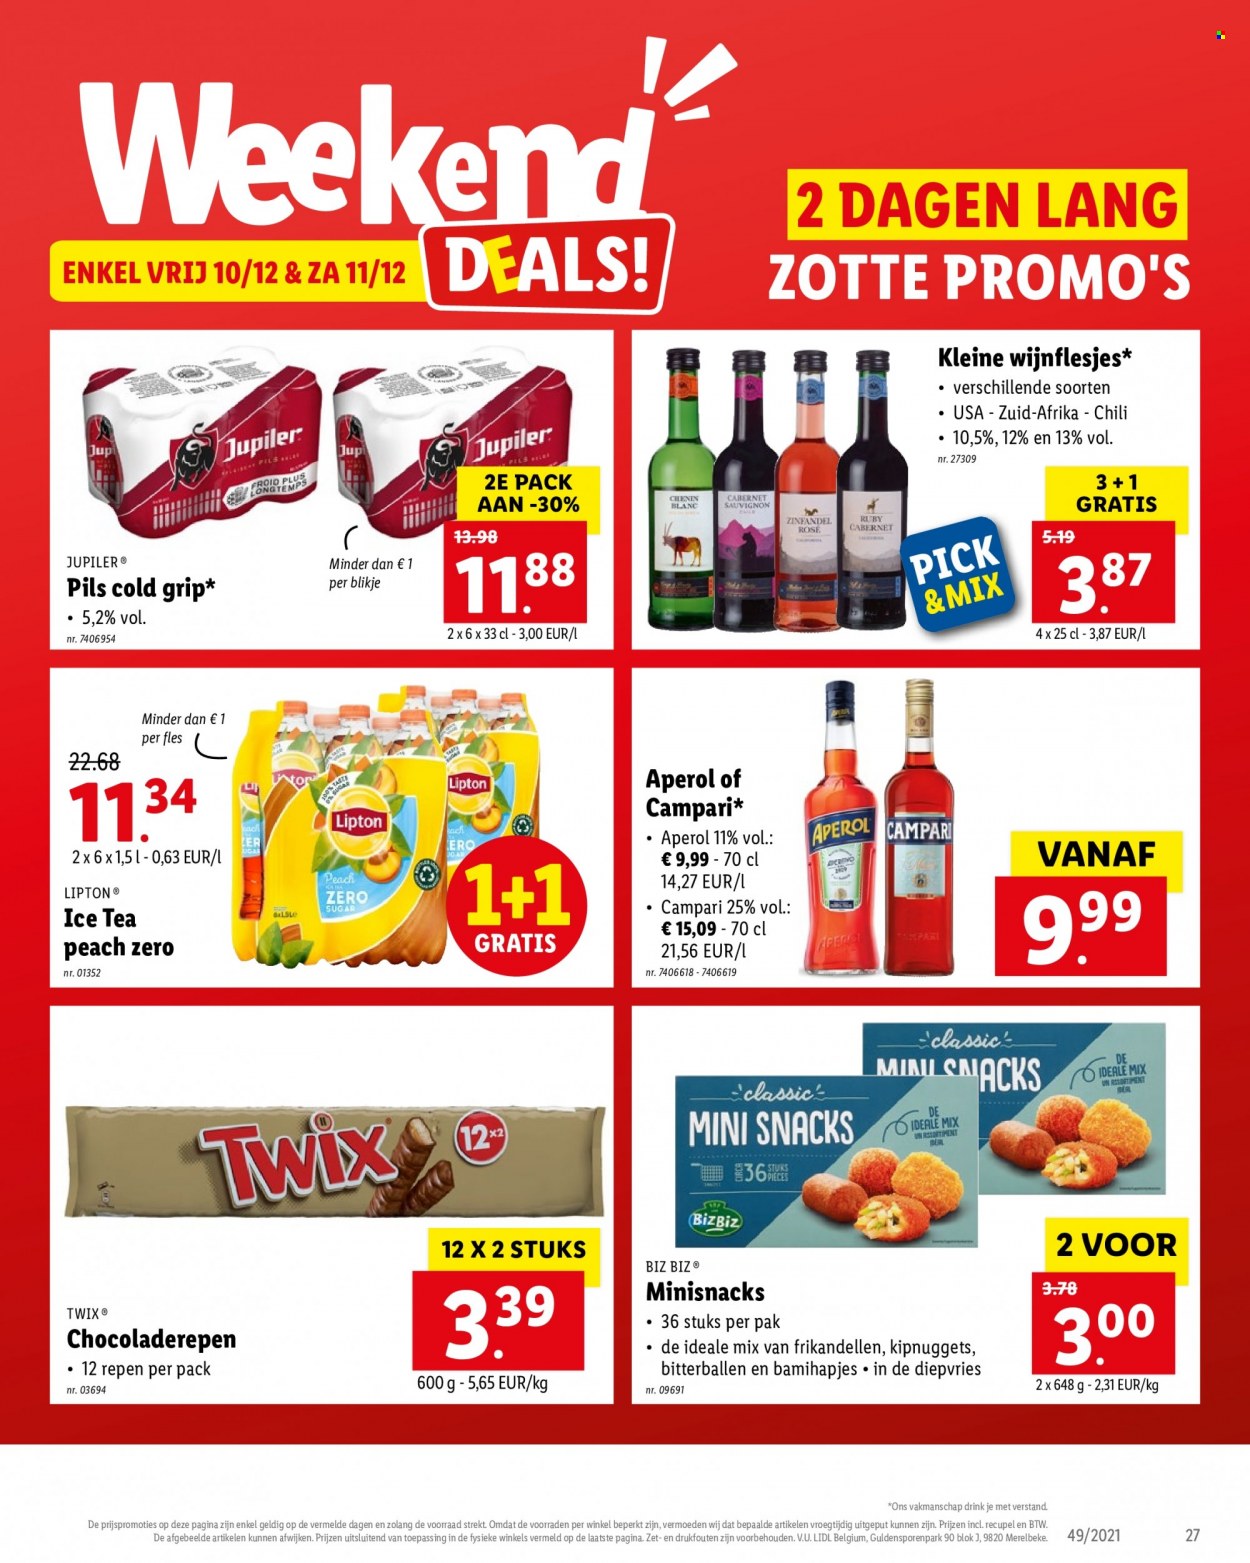 Catalogue Lidl - 6.12.2021 - 11.12.2021. Page 27.